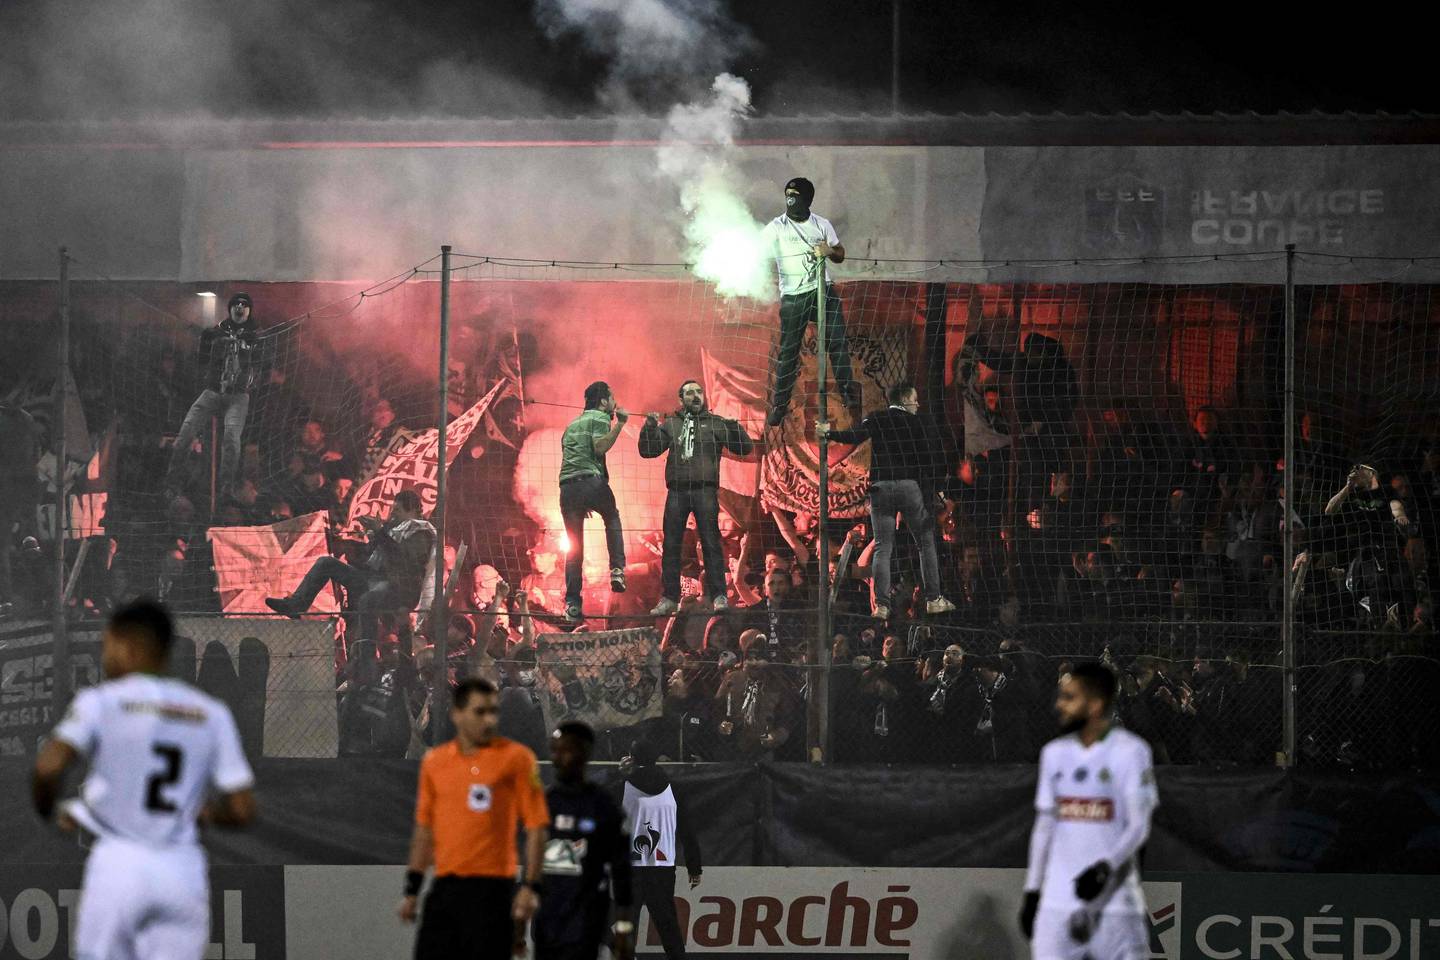 People in the crowd light flares during the French Cup match between Jura Sud and Saint-Etienne. The match was interrupted shortly after for around 20 minutes. AFP